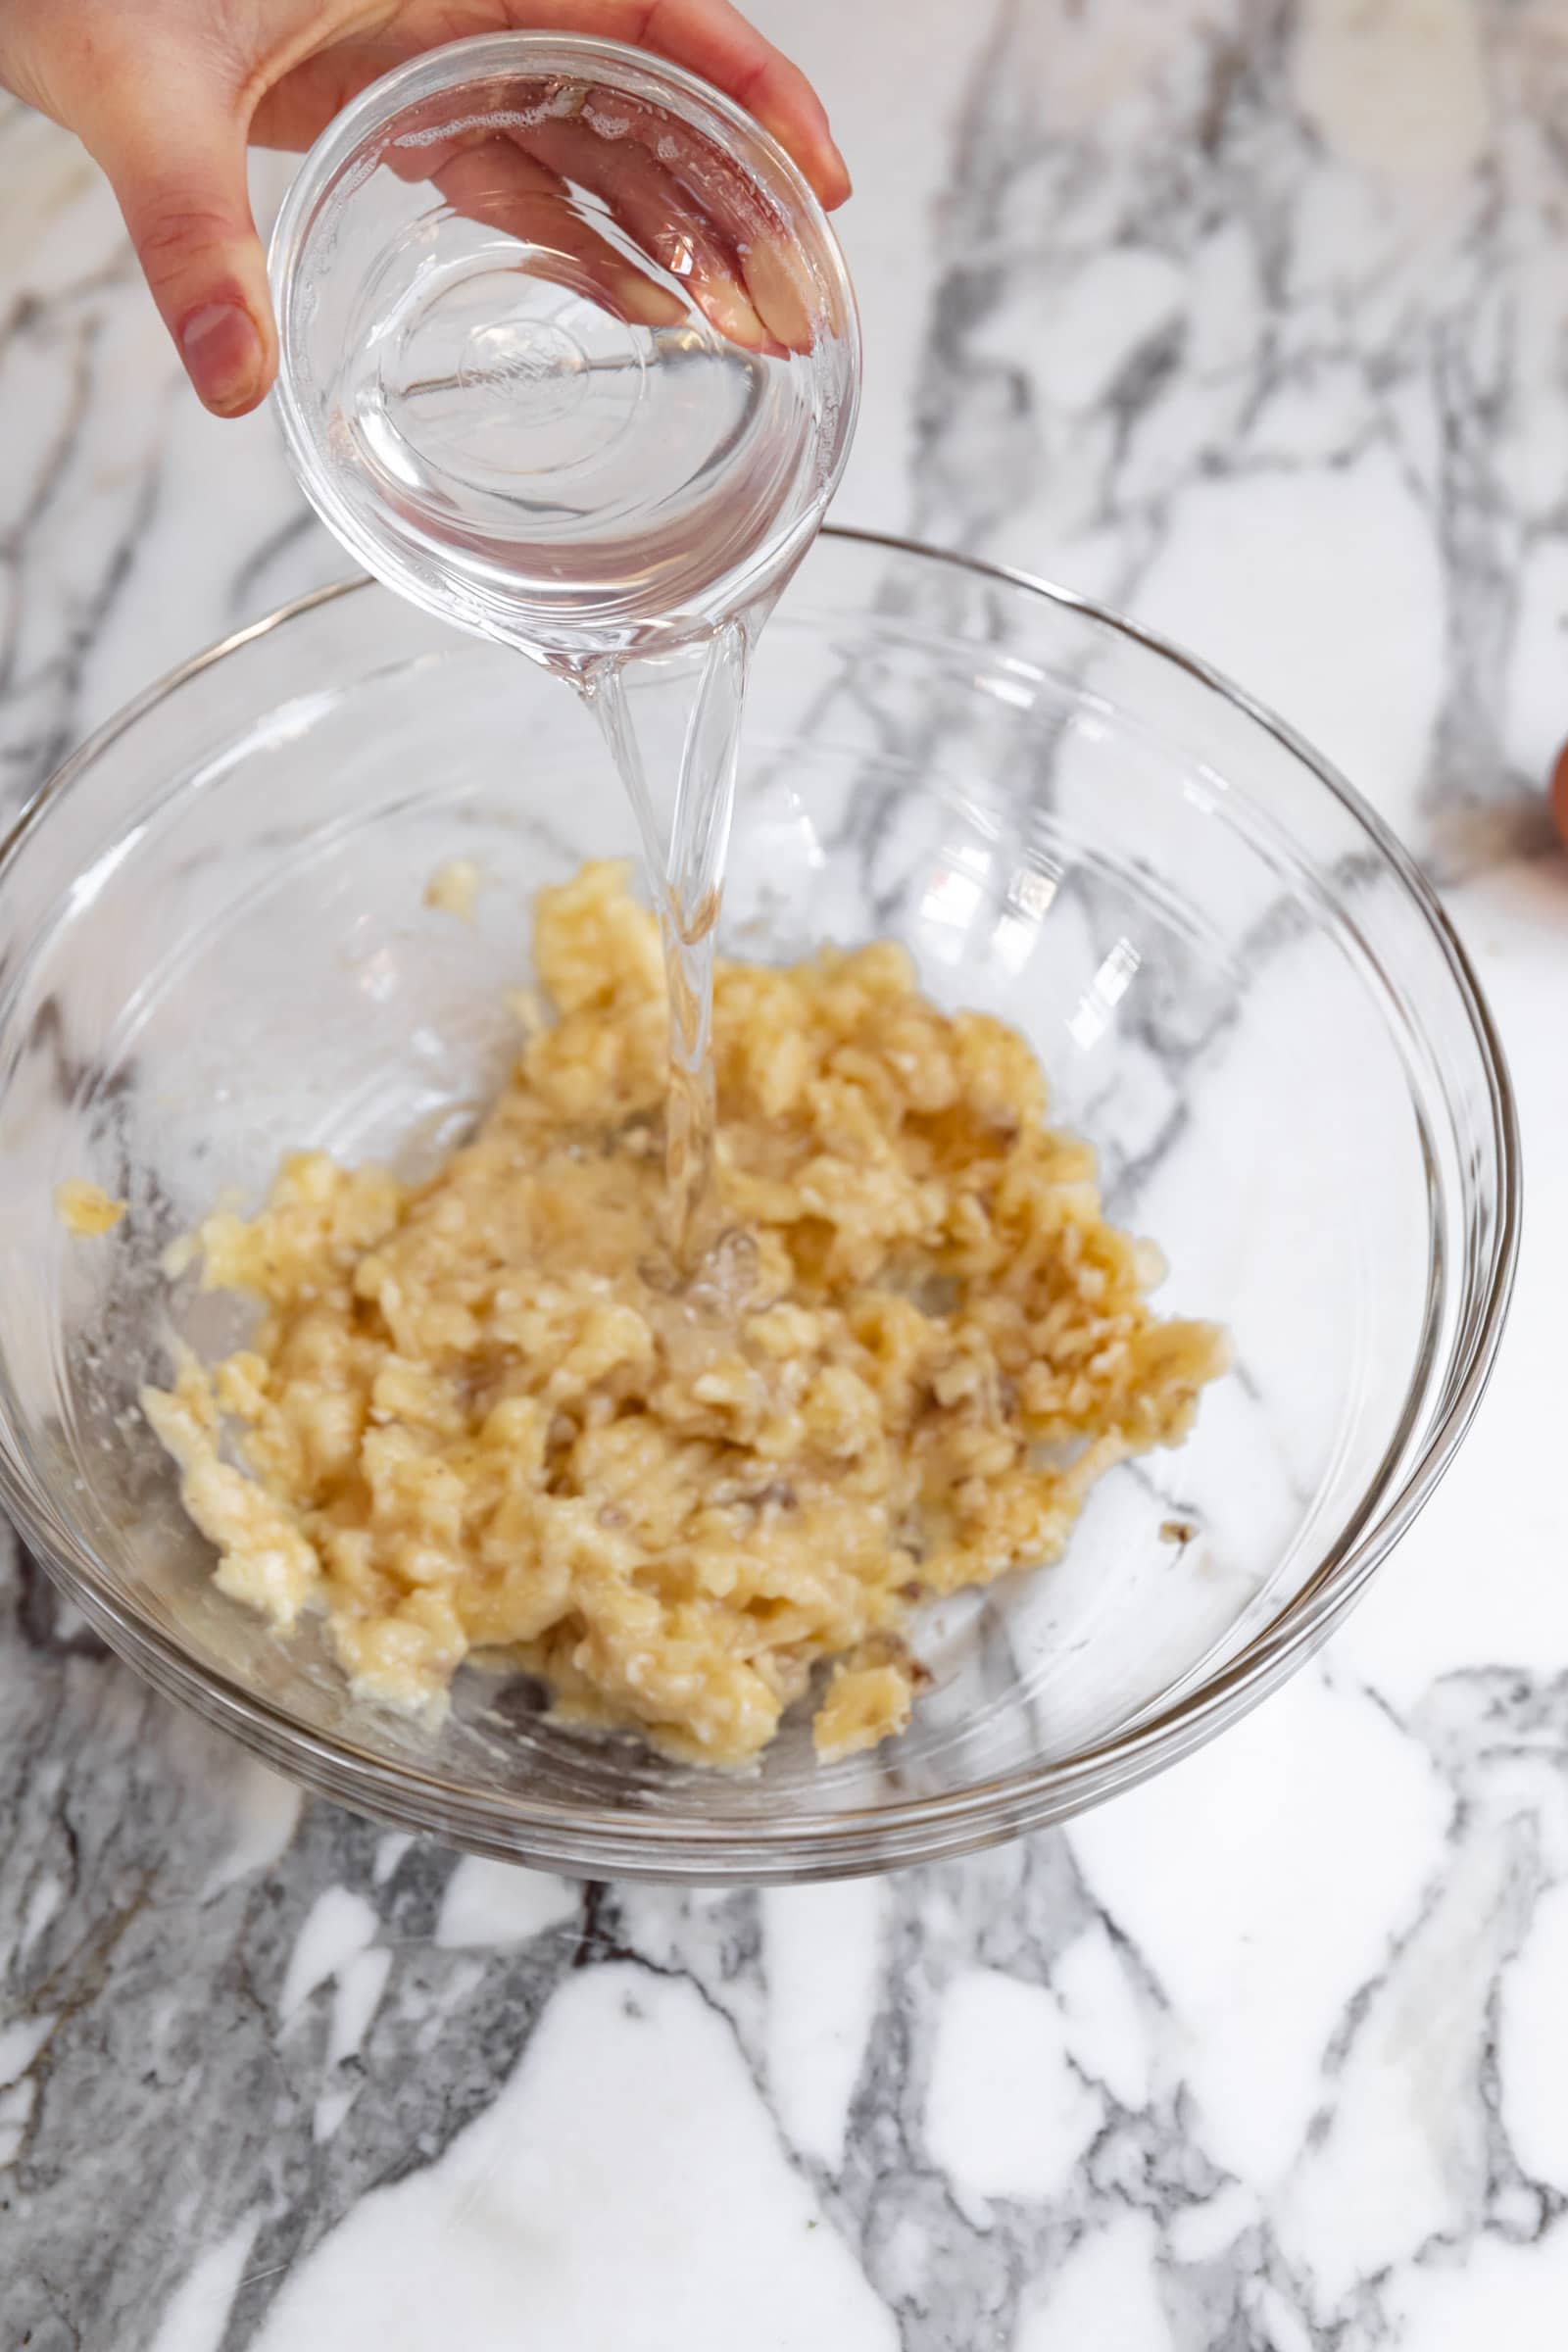 coconut oil with mashed bananas